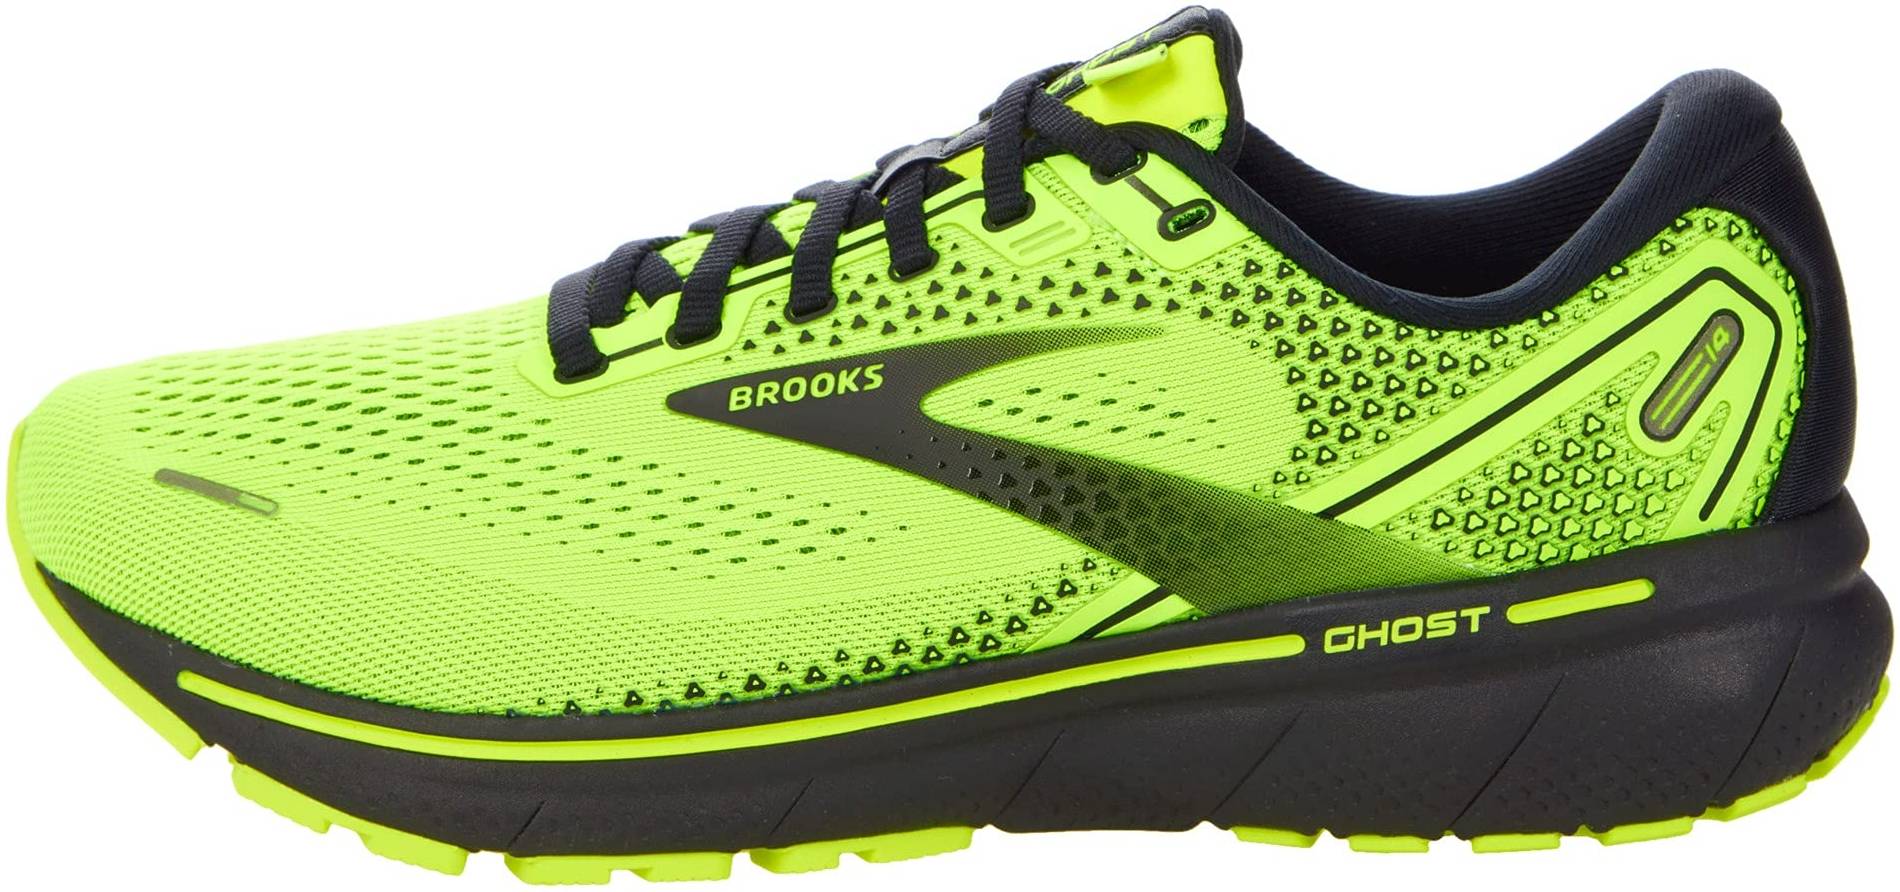 mens lime green running shoes